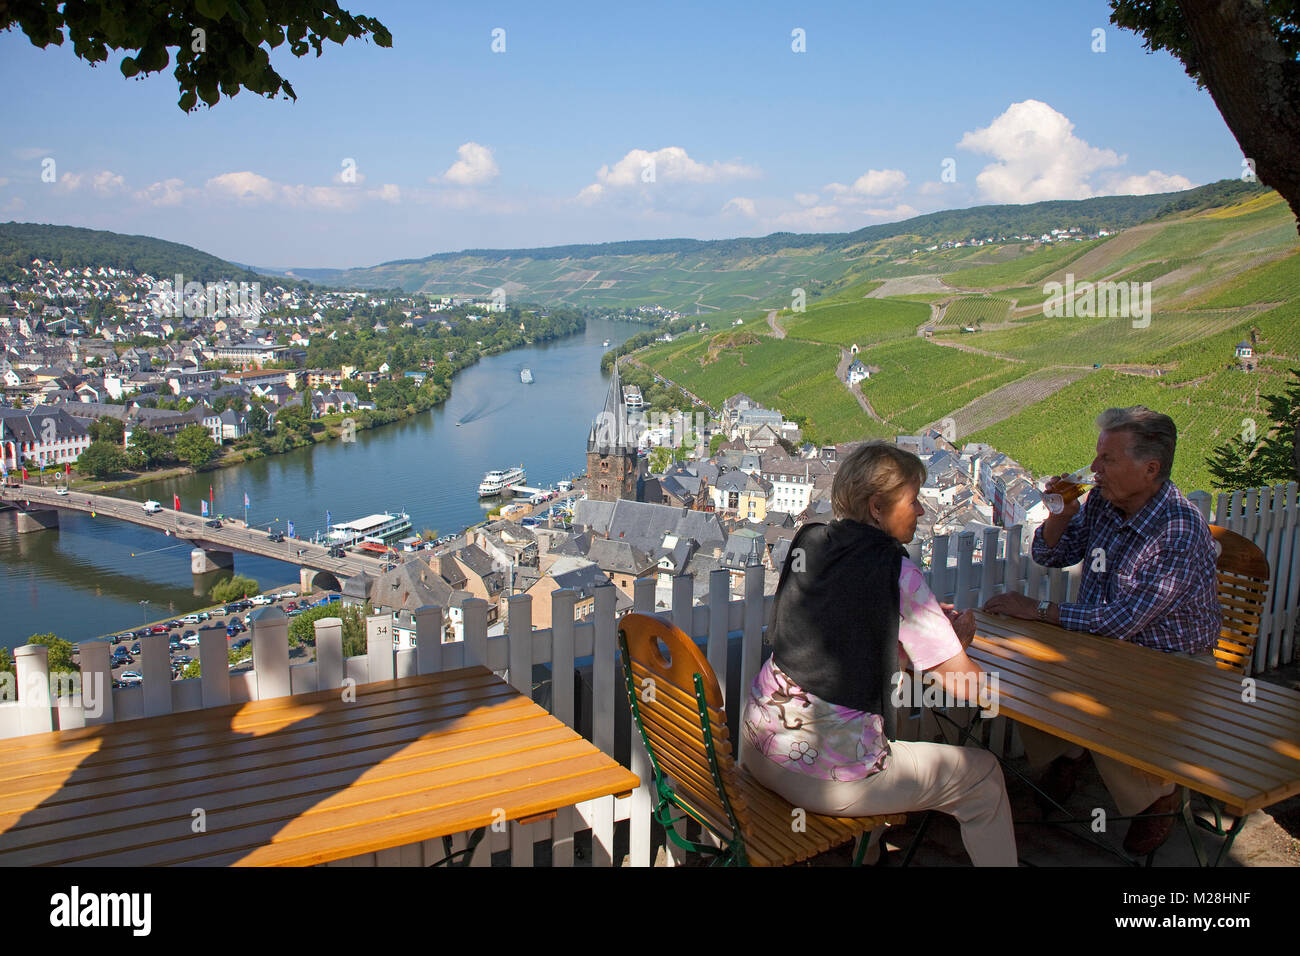 View from a popular restaurant destination on Bernkastel-Kues and Moselle river, Rhineland-Palatinate, Germany, Europe Stock Photo